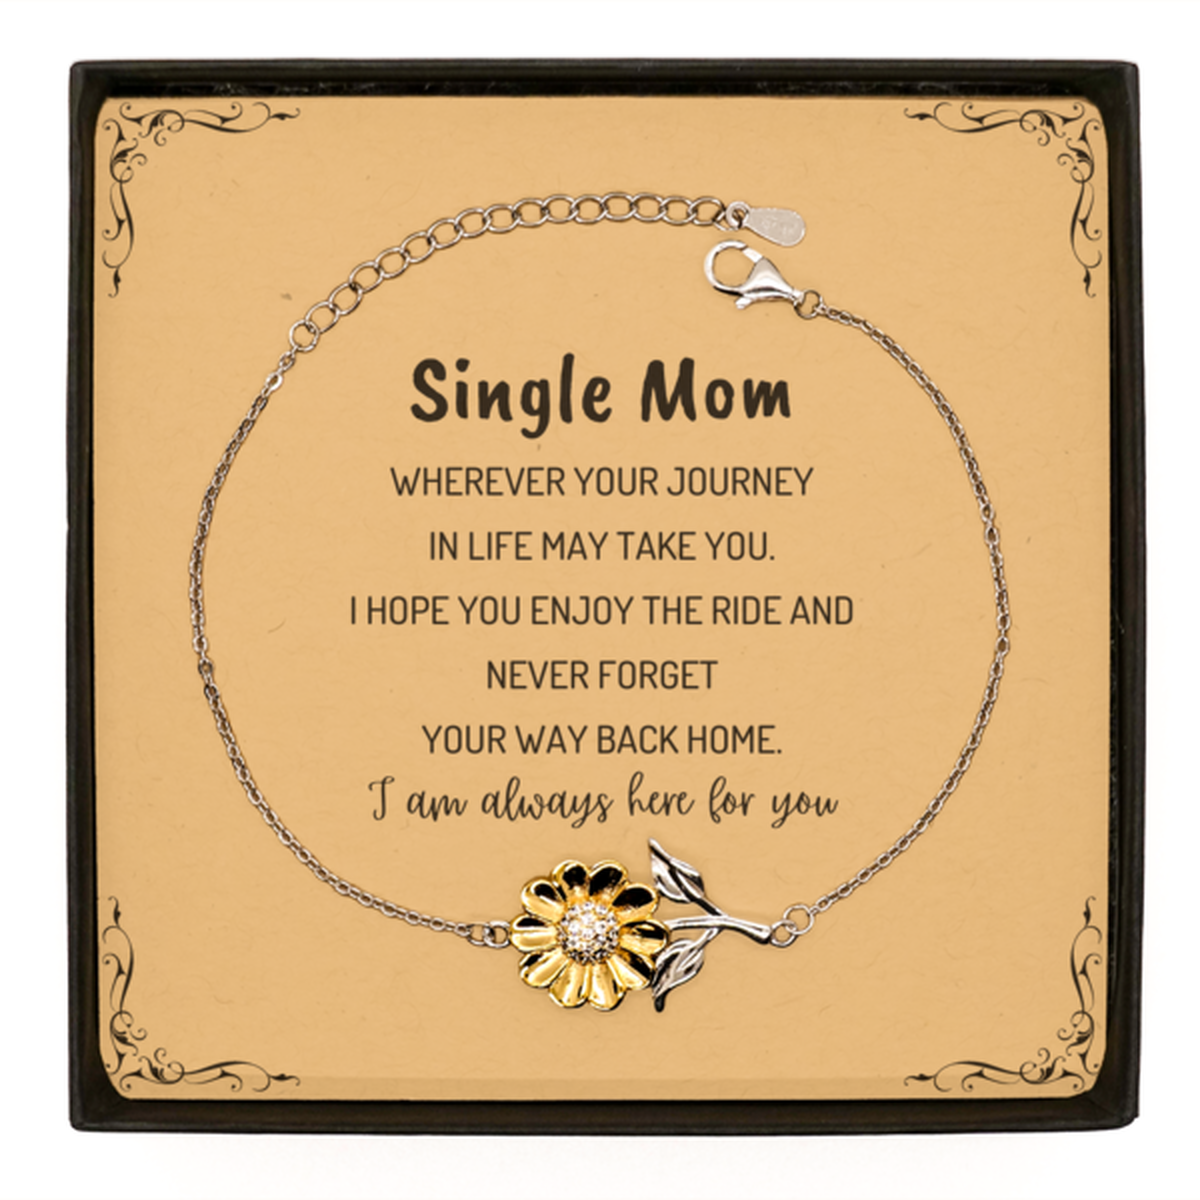 Single Mom wherever your journey in life may take you, I am always here for you Single Mom Sunflower Bracelet, Awesome Christmas Gifts For Single Mom Message Card, Single Mom Birthday Gifts for Men Women Family Loved One